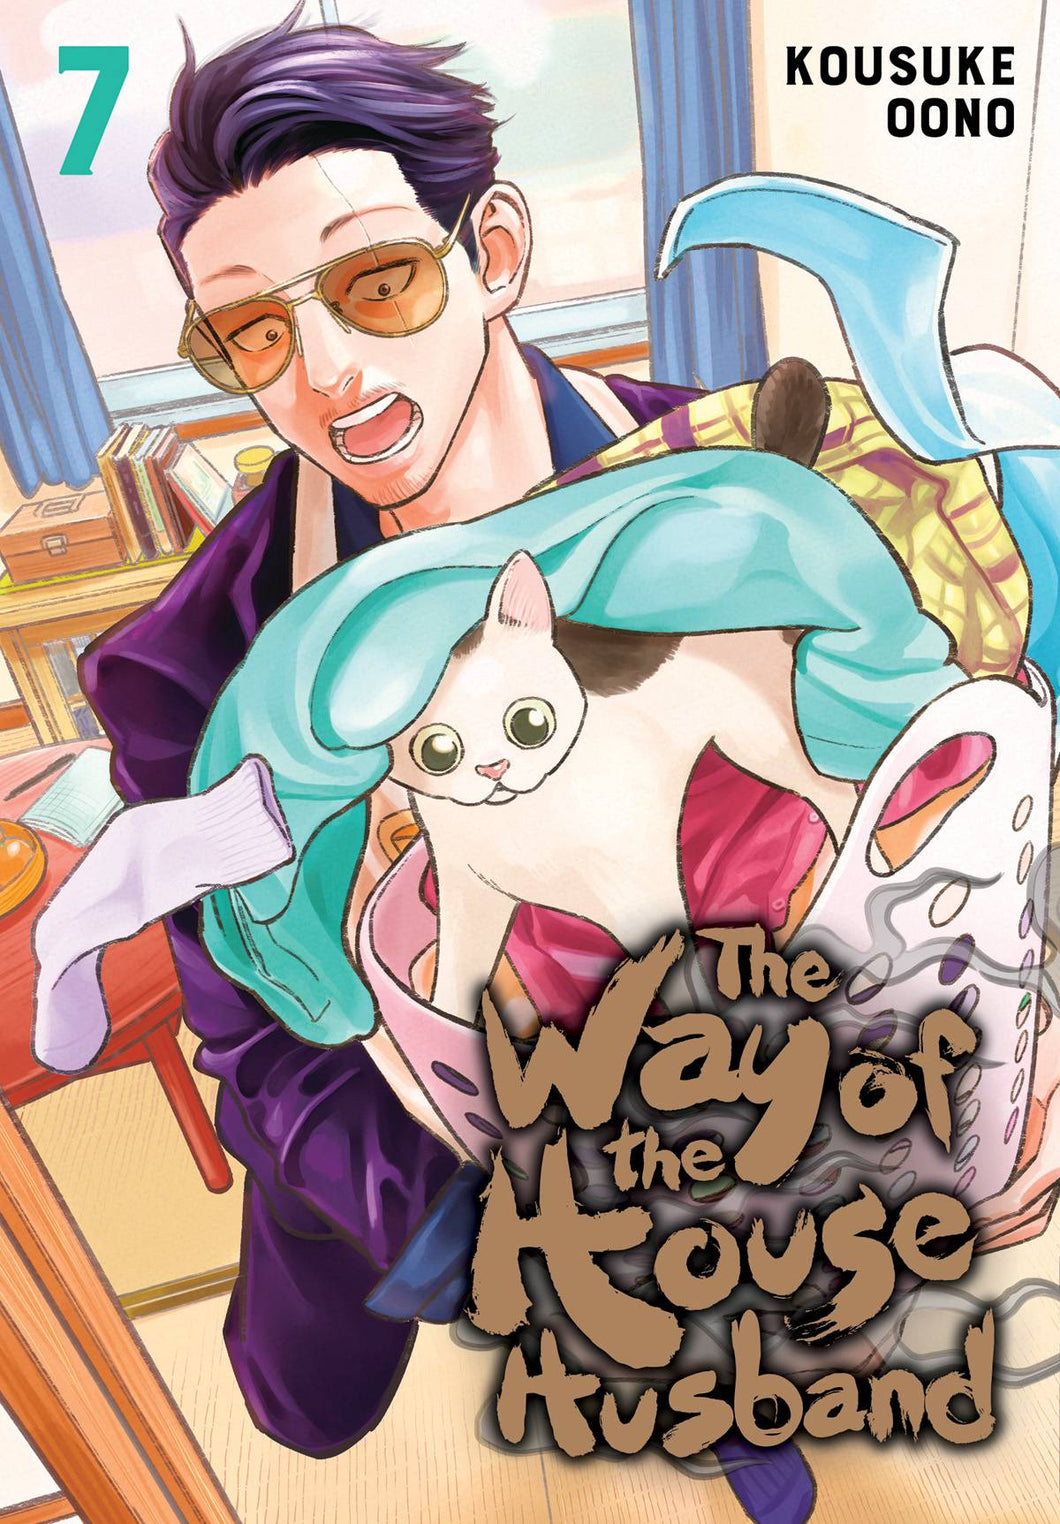 Way of The Househusband GN Vol 07 - Books